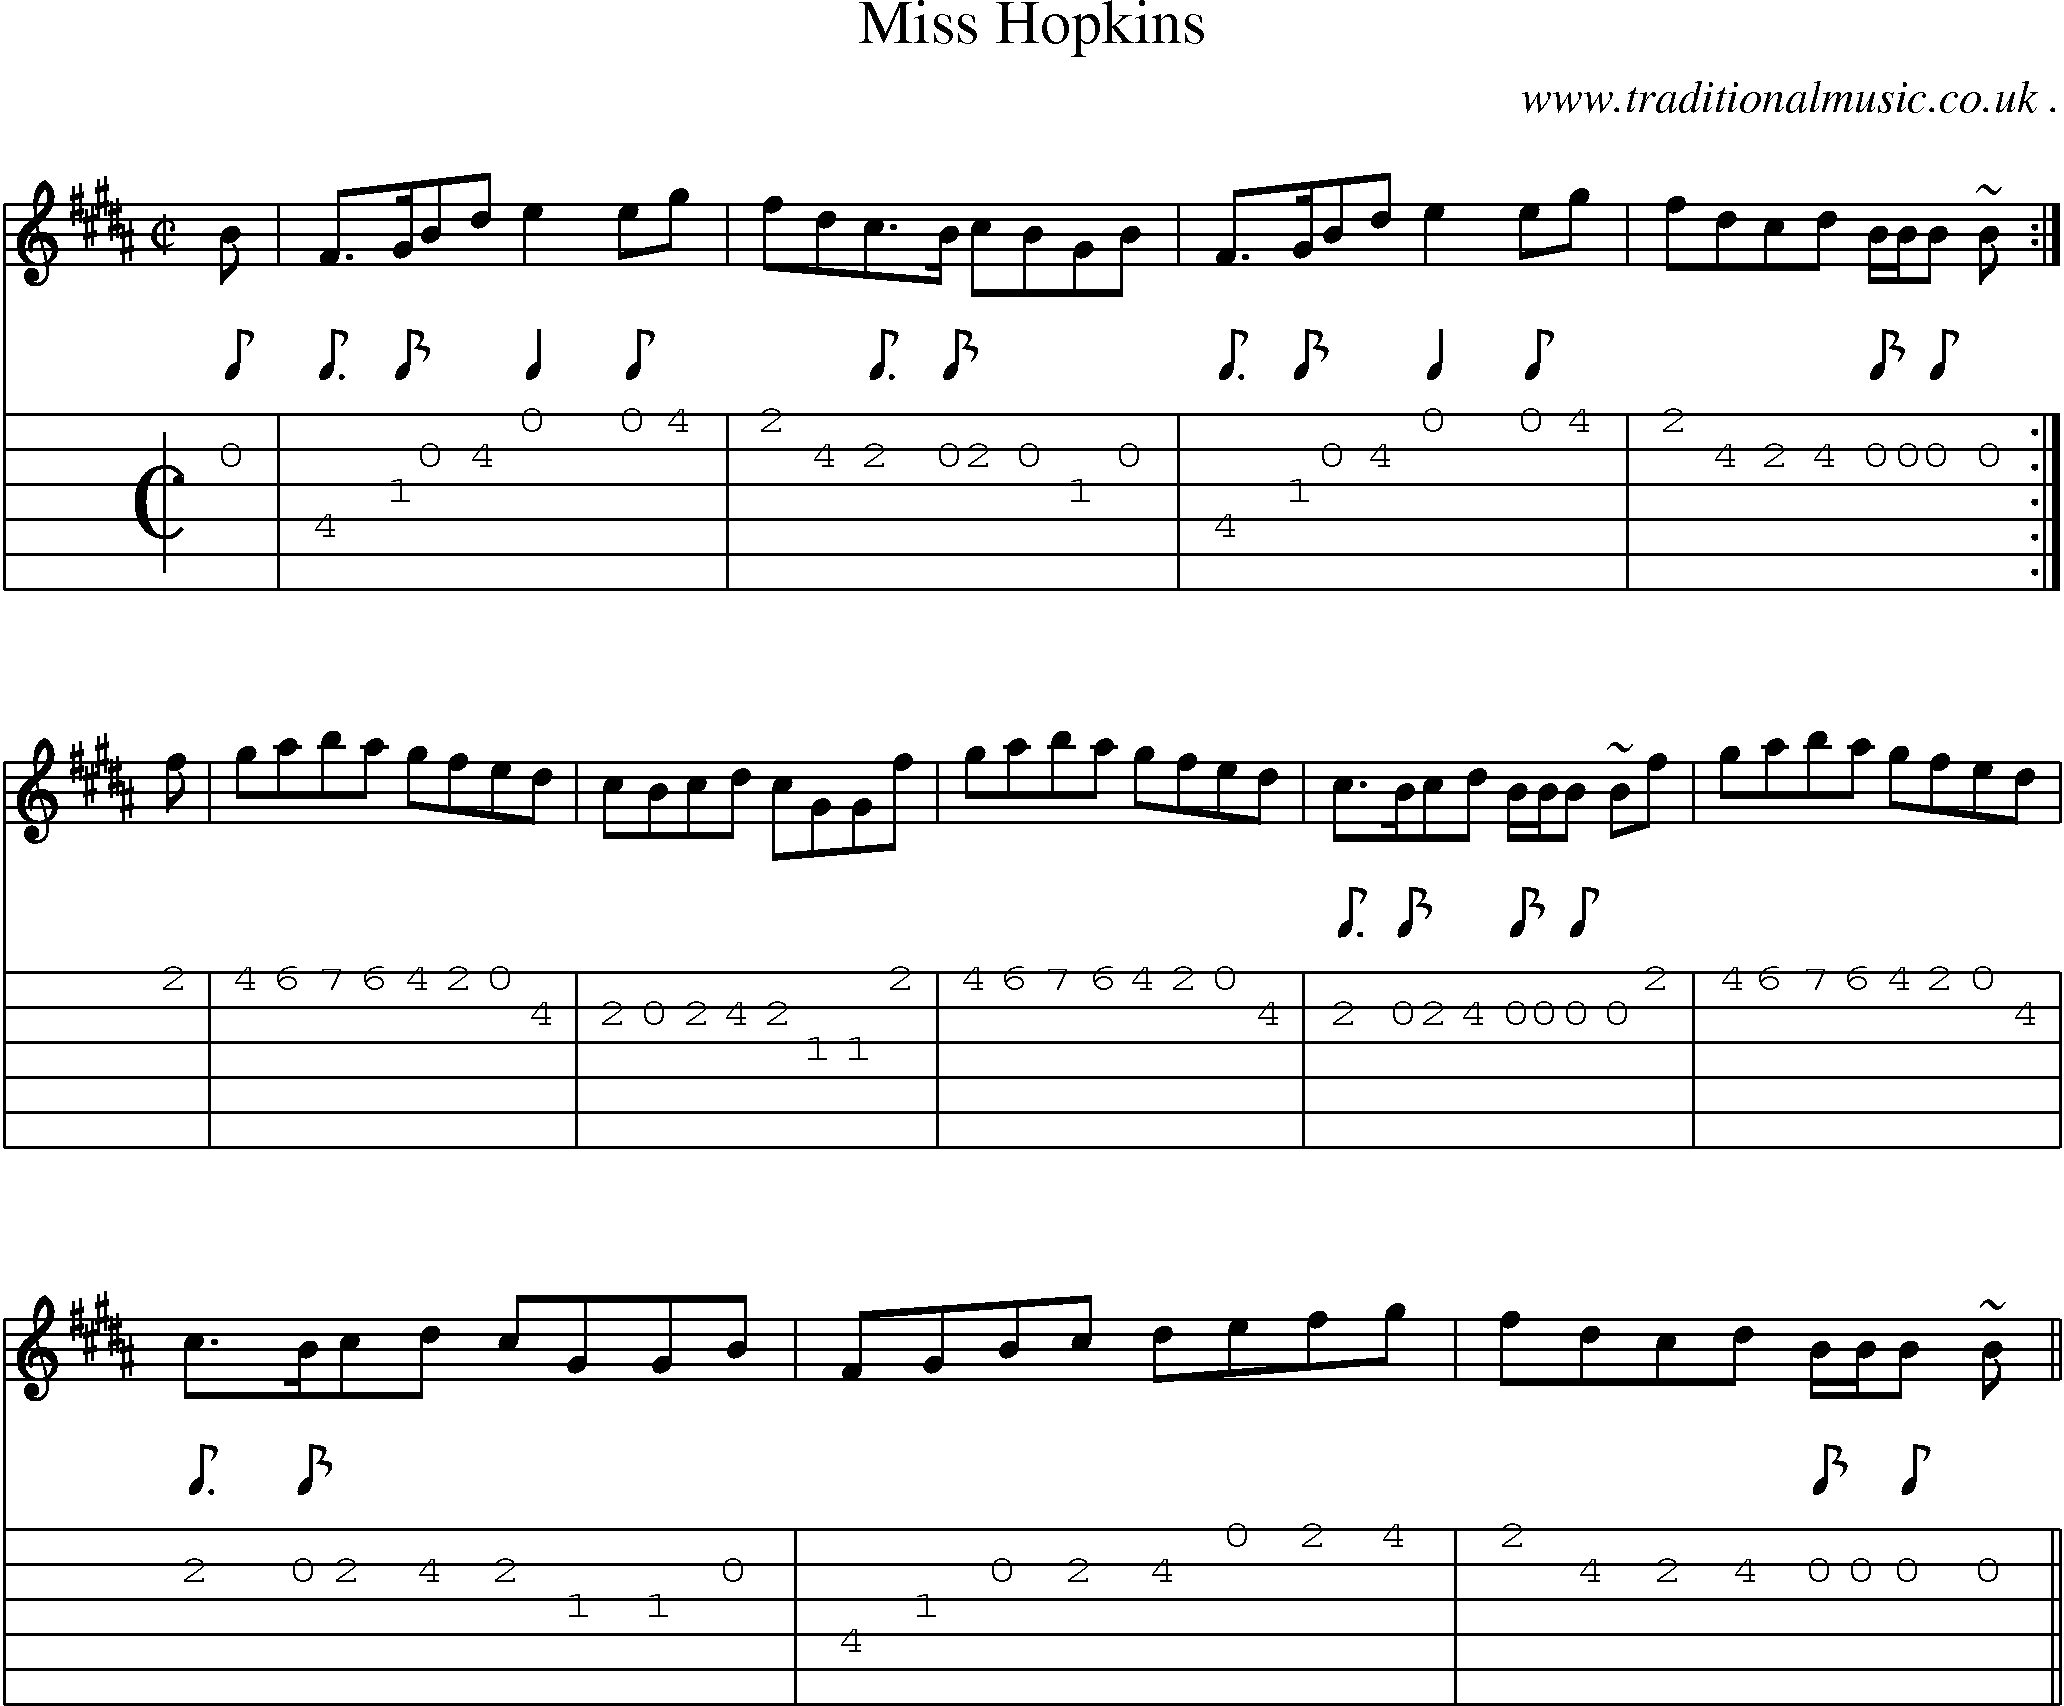 Sheet-music  score, Chords and Guitar Tabs for Miss Hopkins